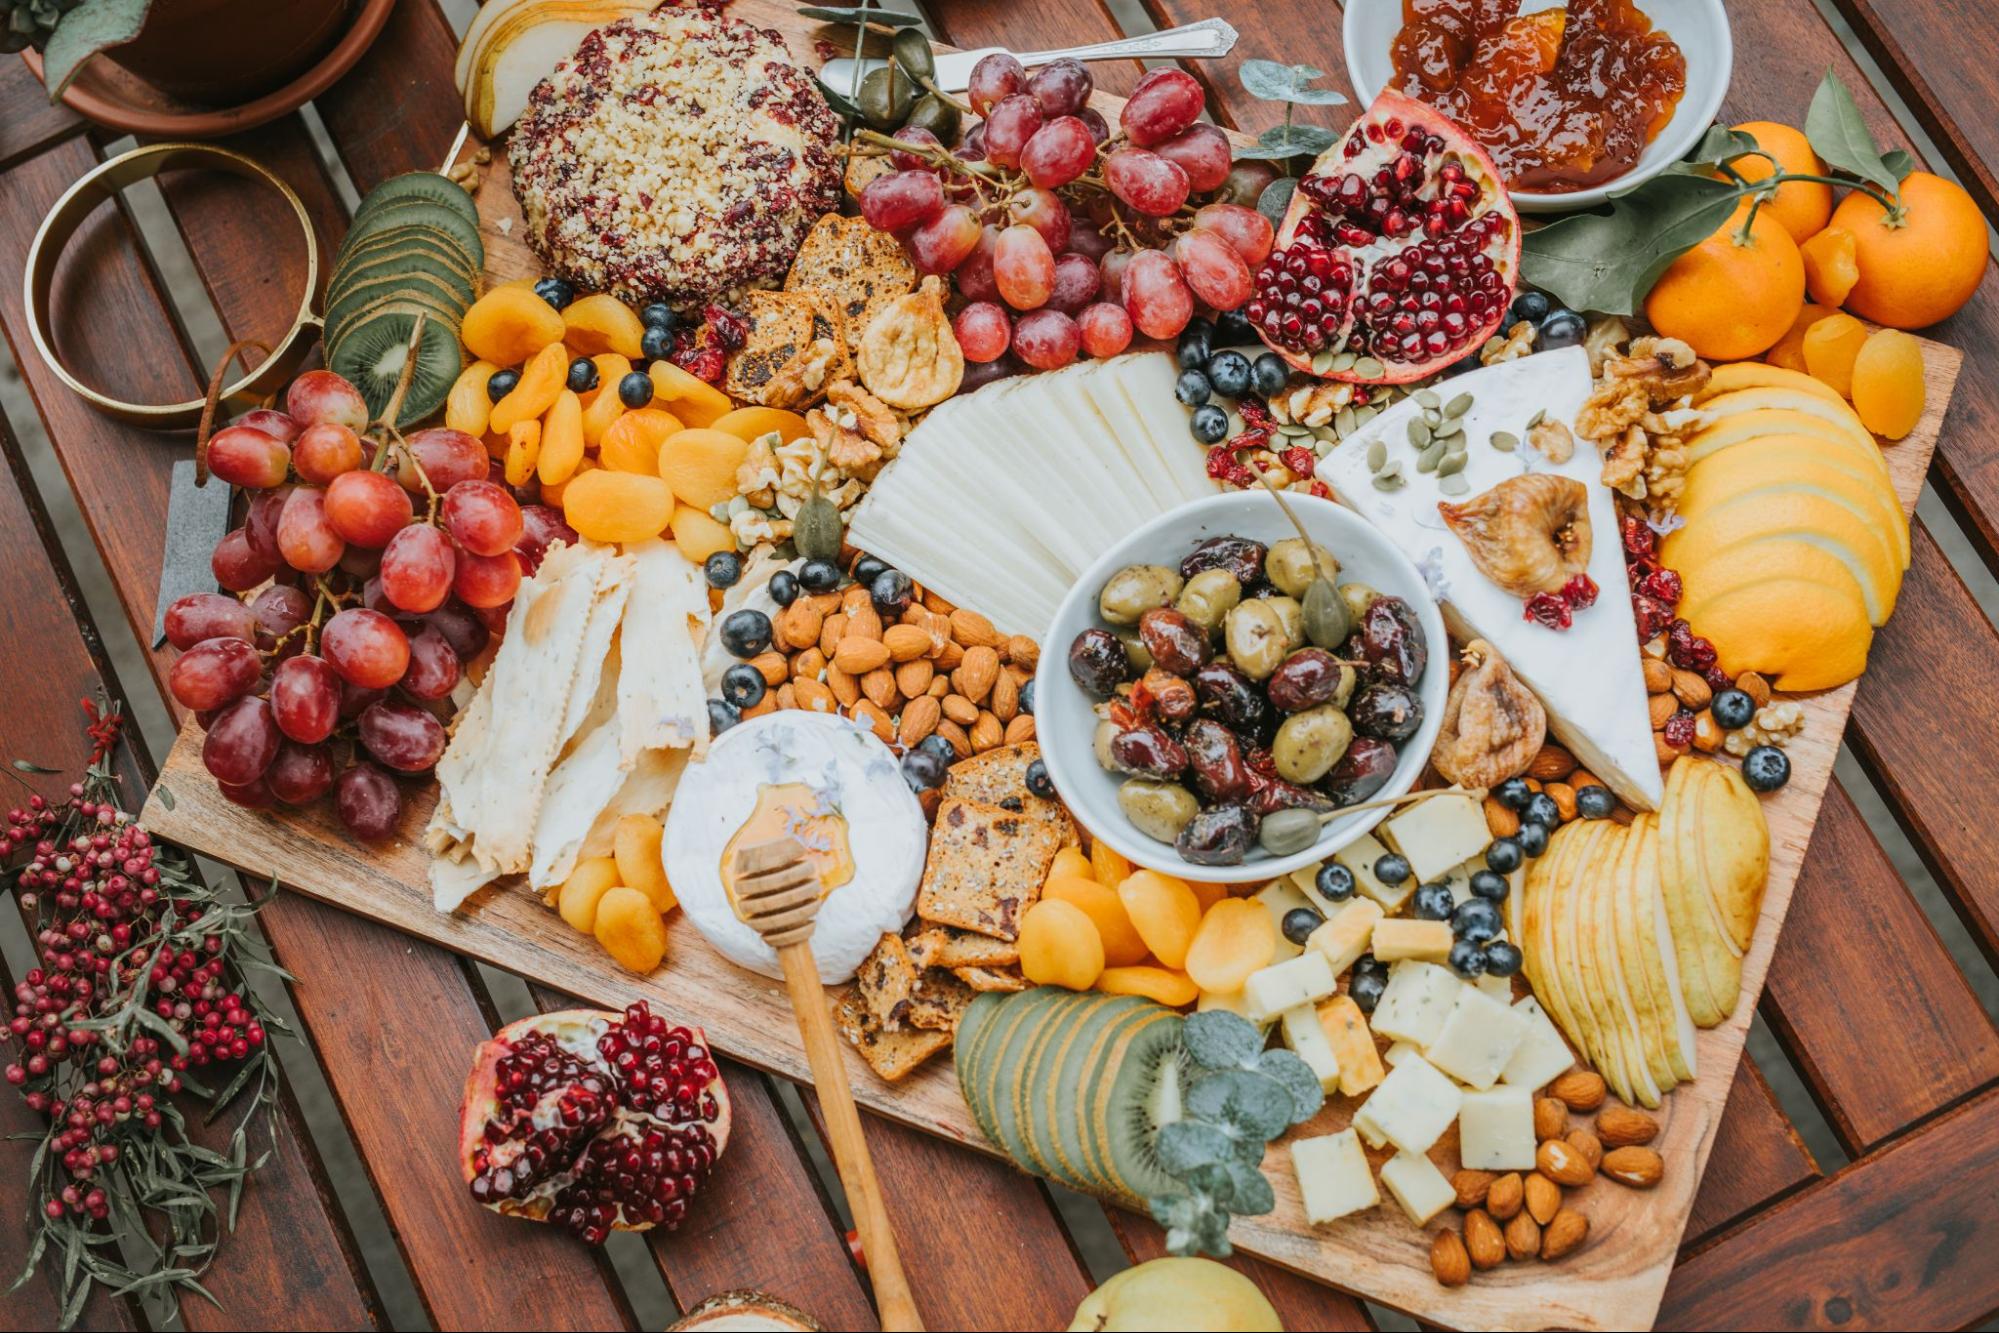 A cheese board full of fruit, cheese, snacks, and dips.